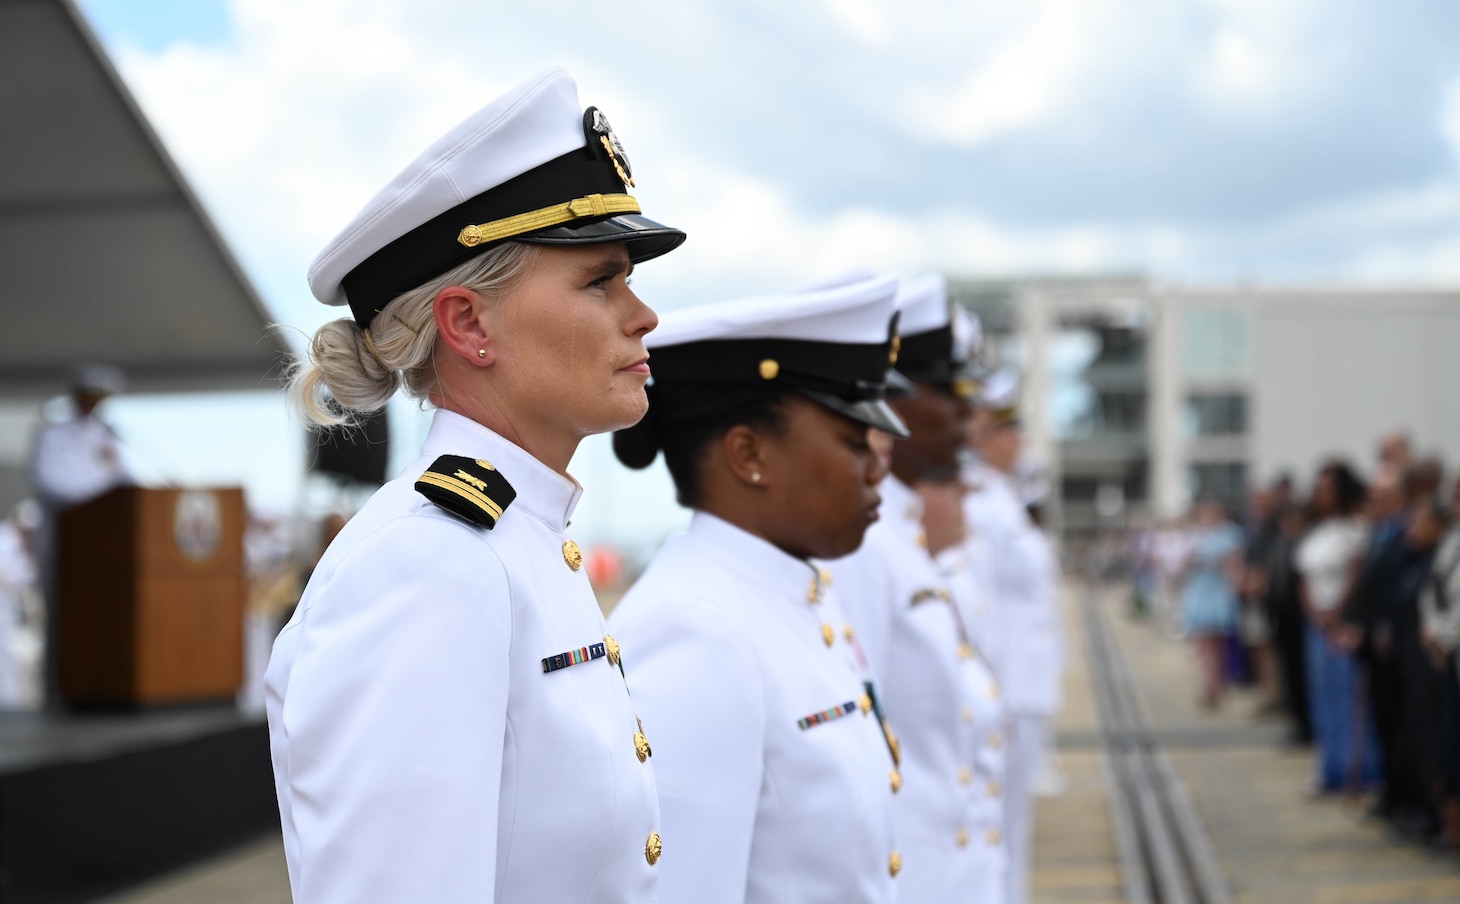 Sailors stand at attention in front of the crowd during the commissioning of the Navy’s newest Arleigh Burke-class guided-missile destroyer USS Frank E. Petersen Jr. (DDG 121) in Charleston, S.C., May 14, 2022.